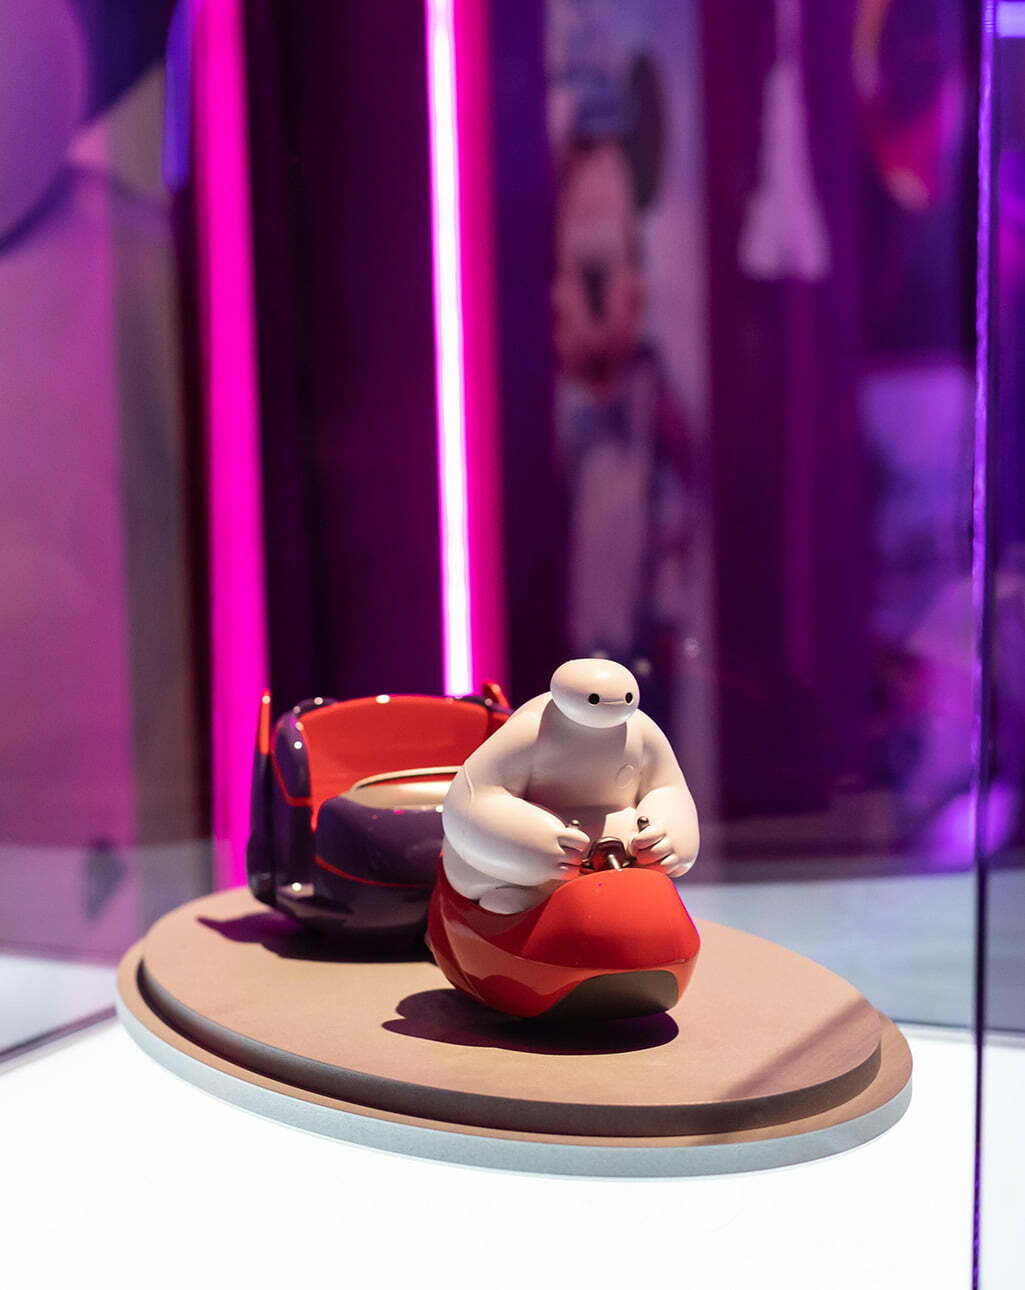 The Happy Ride with Baymax ride vehicle maquette (Photo: Julie Nguyen/SNAP TASTE)